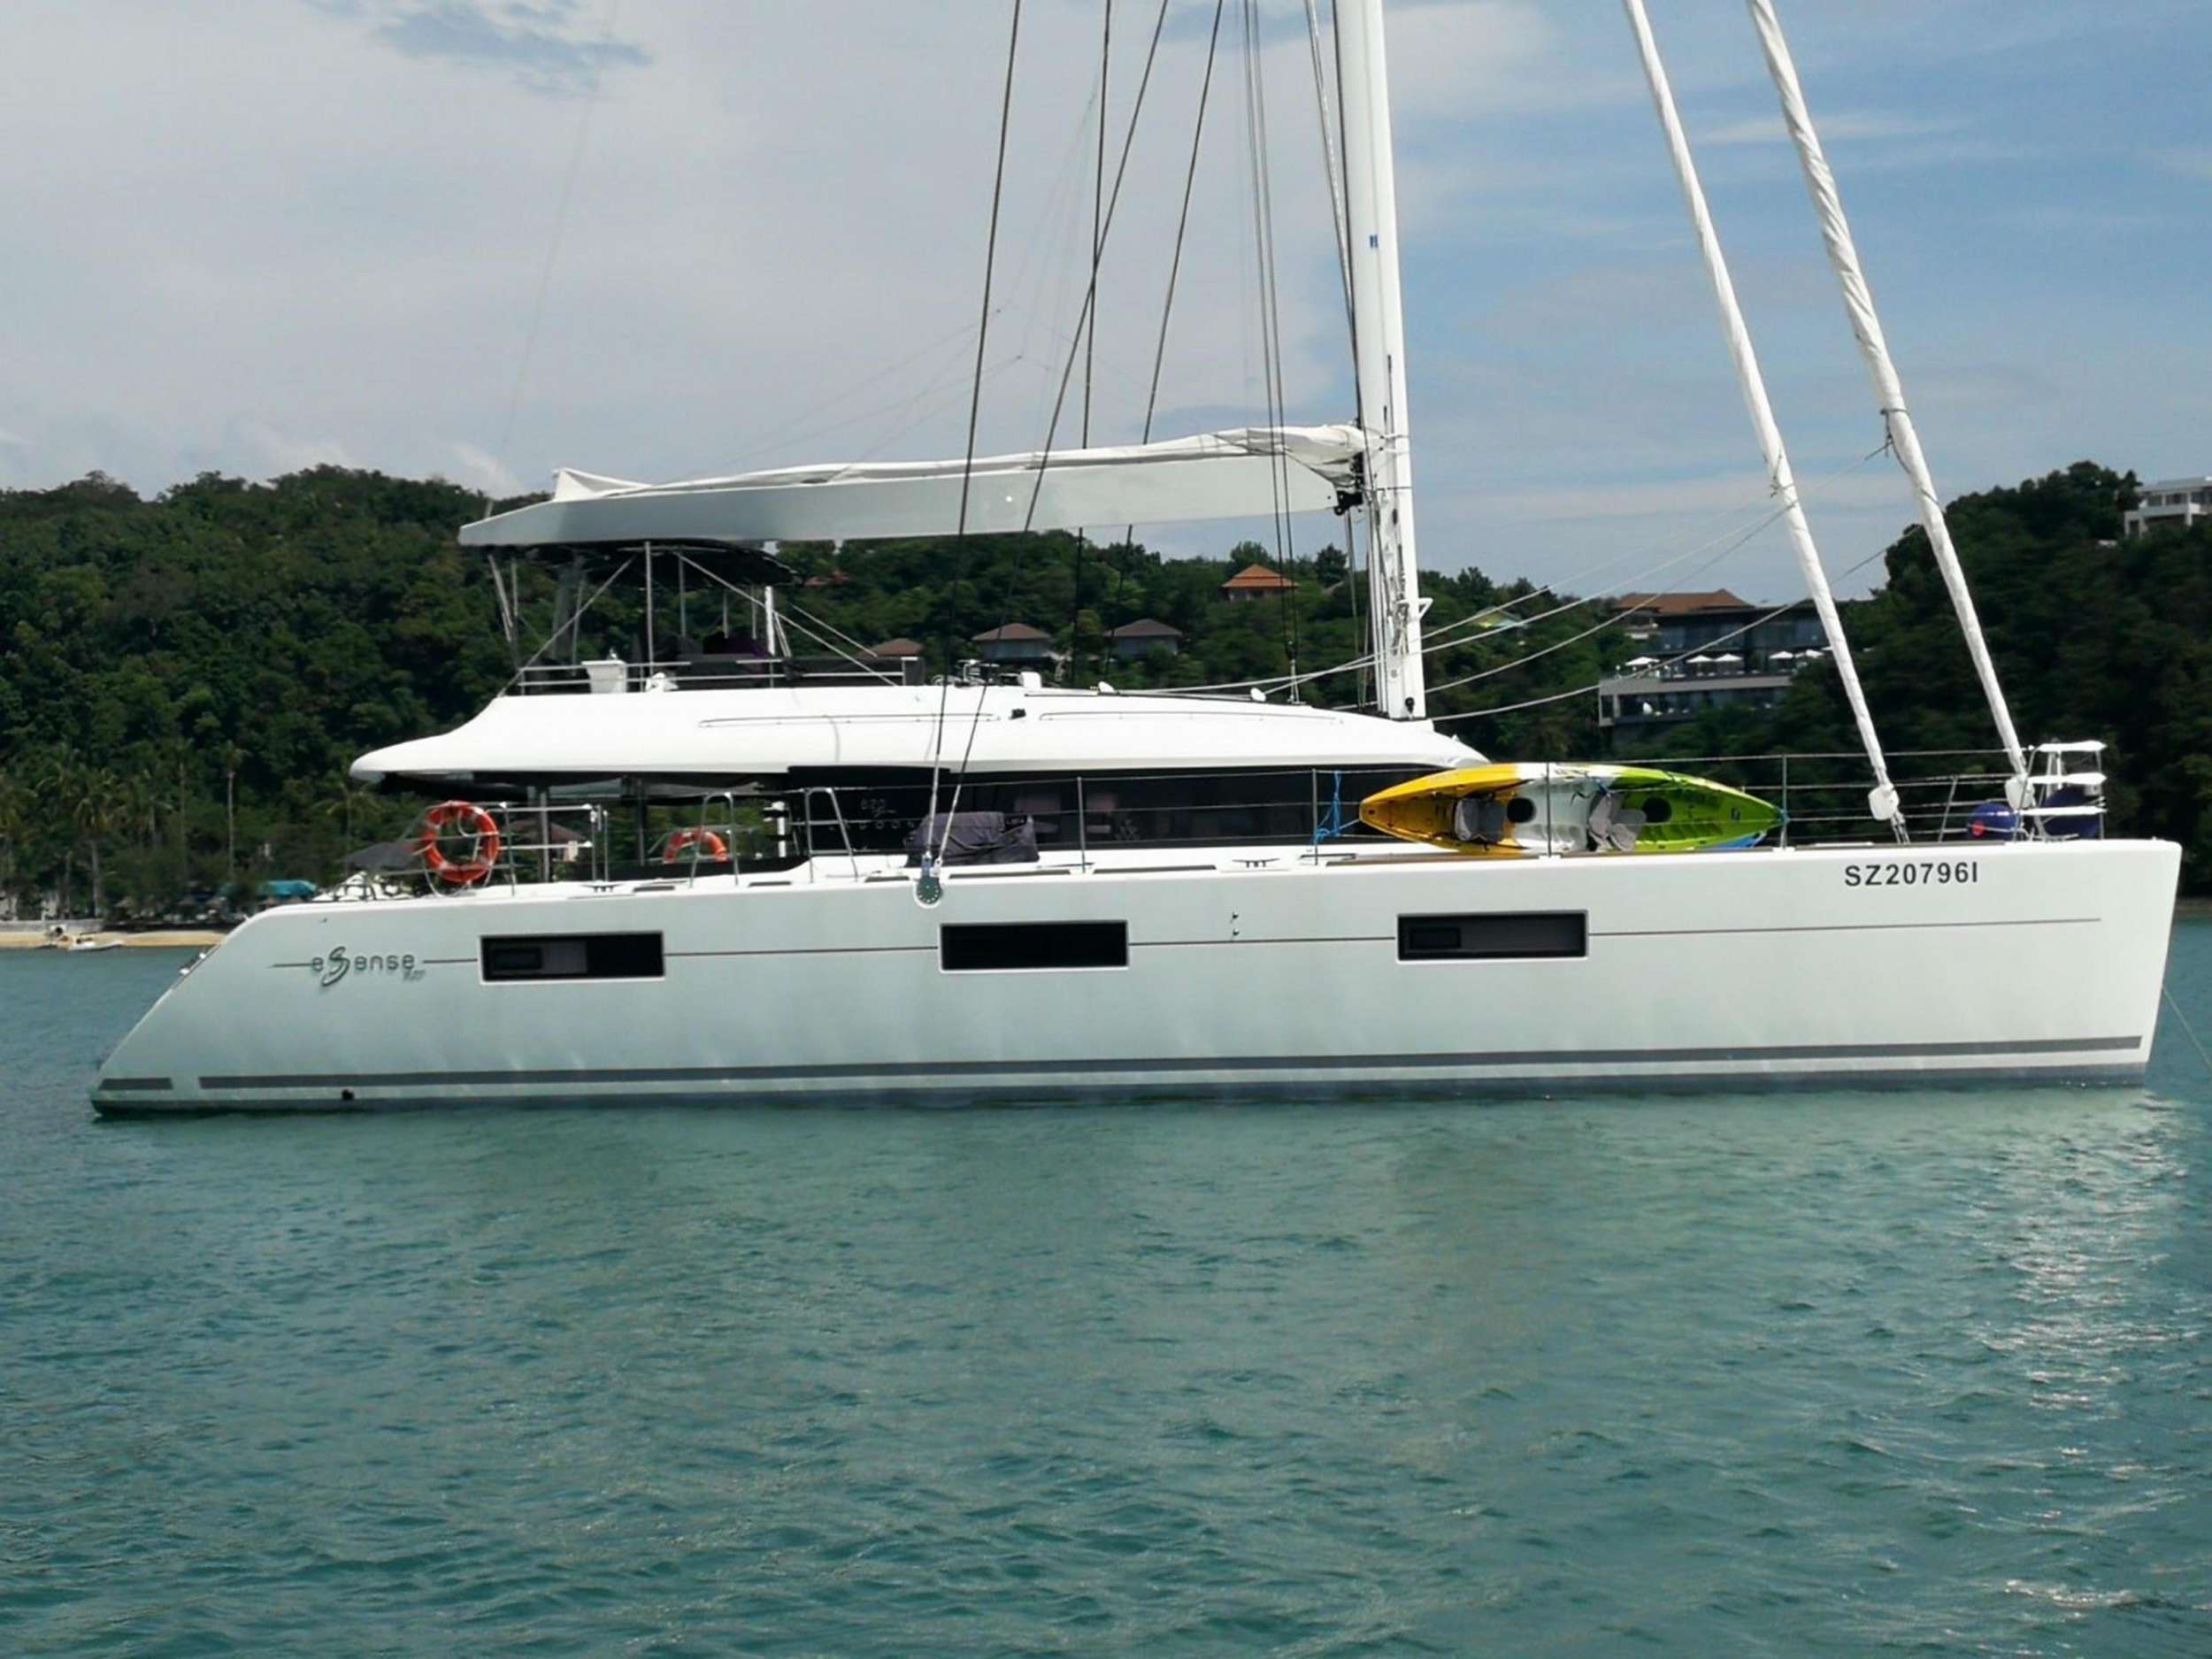 Six Degrees - Yacht Charter Langkawi & Boat hire in SE Asia 1